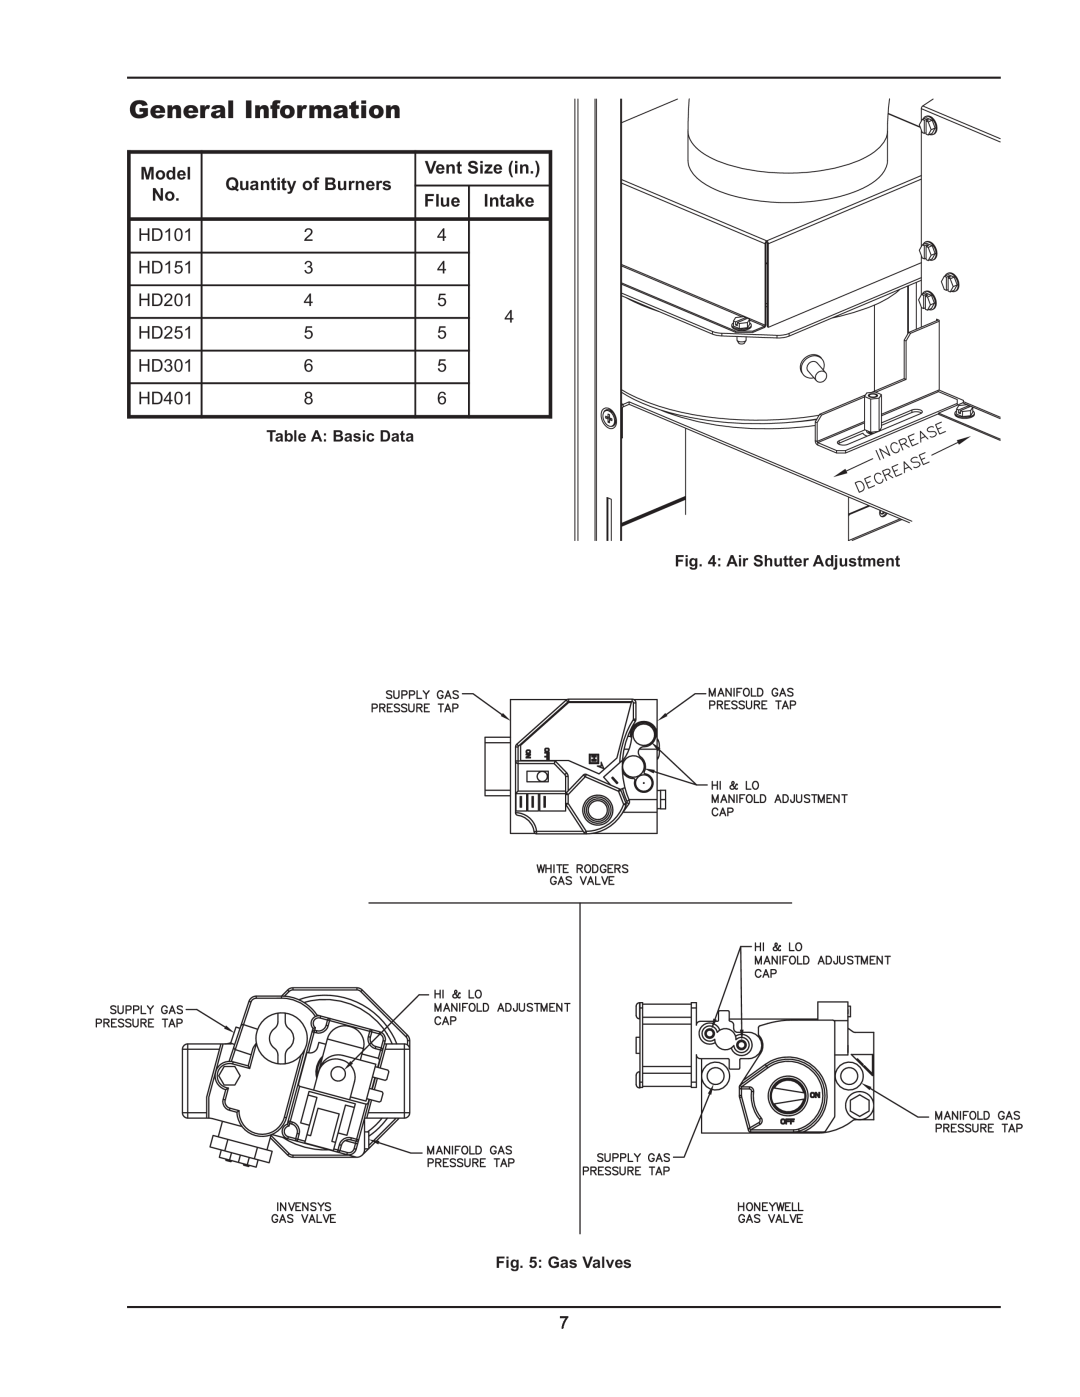 Raypak HD101, HD401 manual General Information, Model, Quantity of Burners, Vent Size in, Flue 